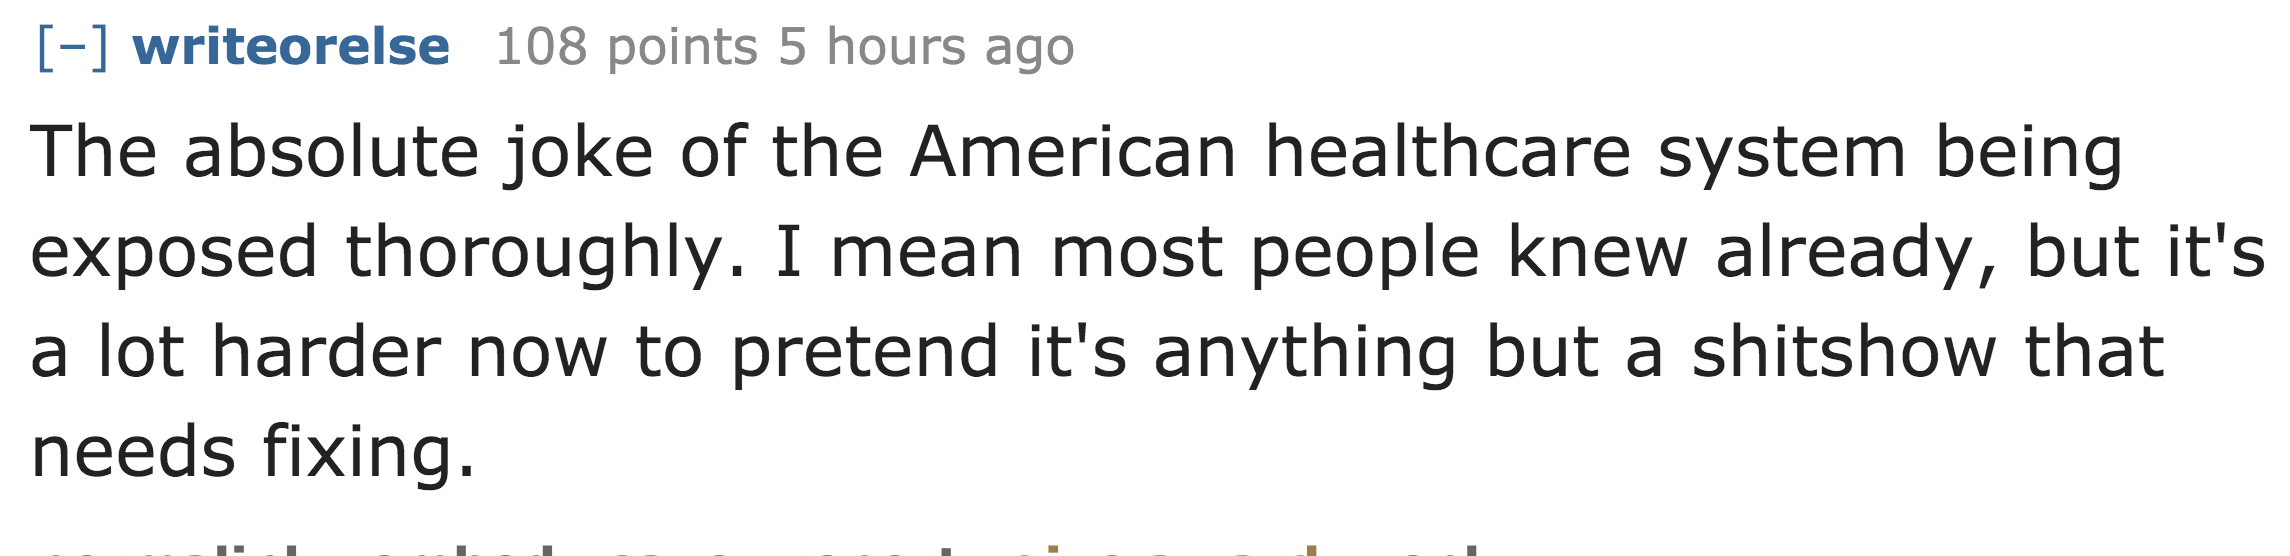 The absolute joke of the American healthcare system being exposed thoroughly. I mean most people knew already, but it's a lot harder now to pretend it's anything but a shitshow that needs fixing.